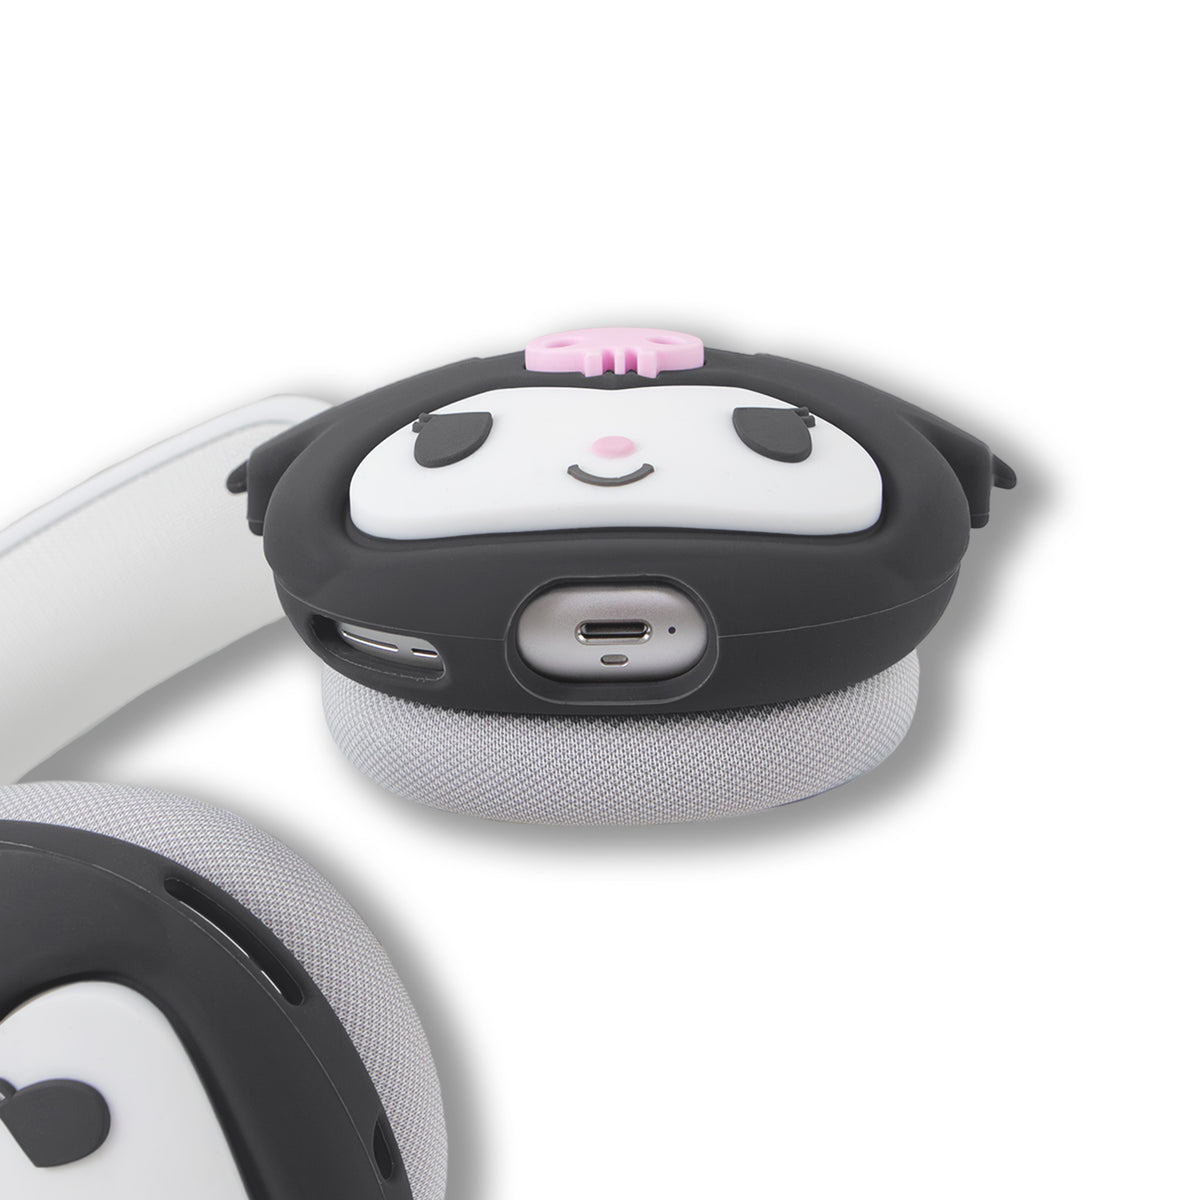 Kuromi x Sonix Silicone AirPods Max Cover